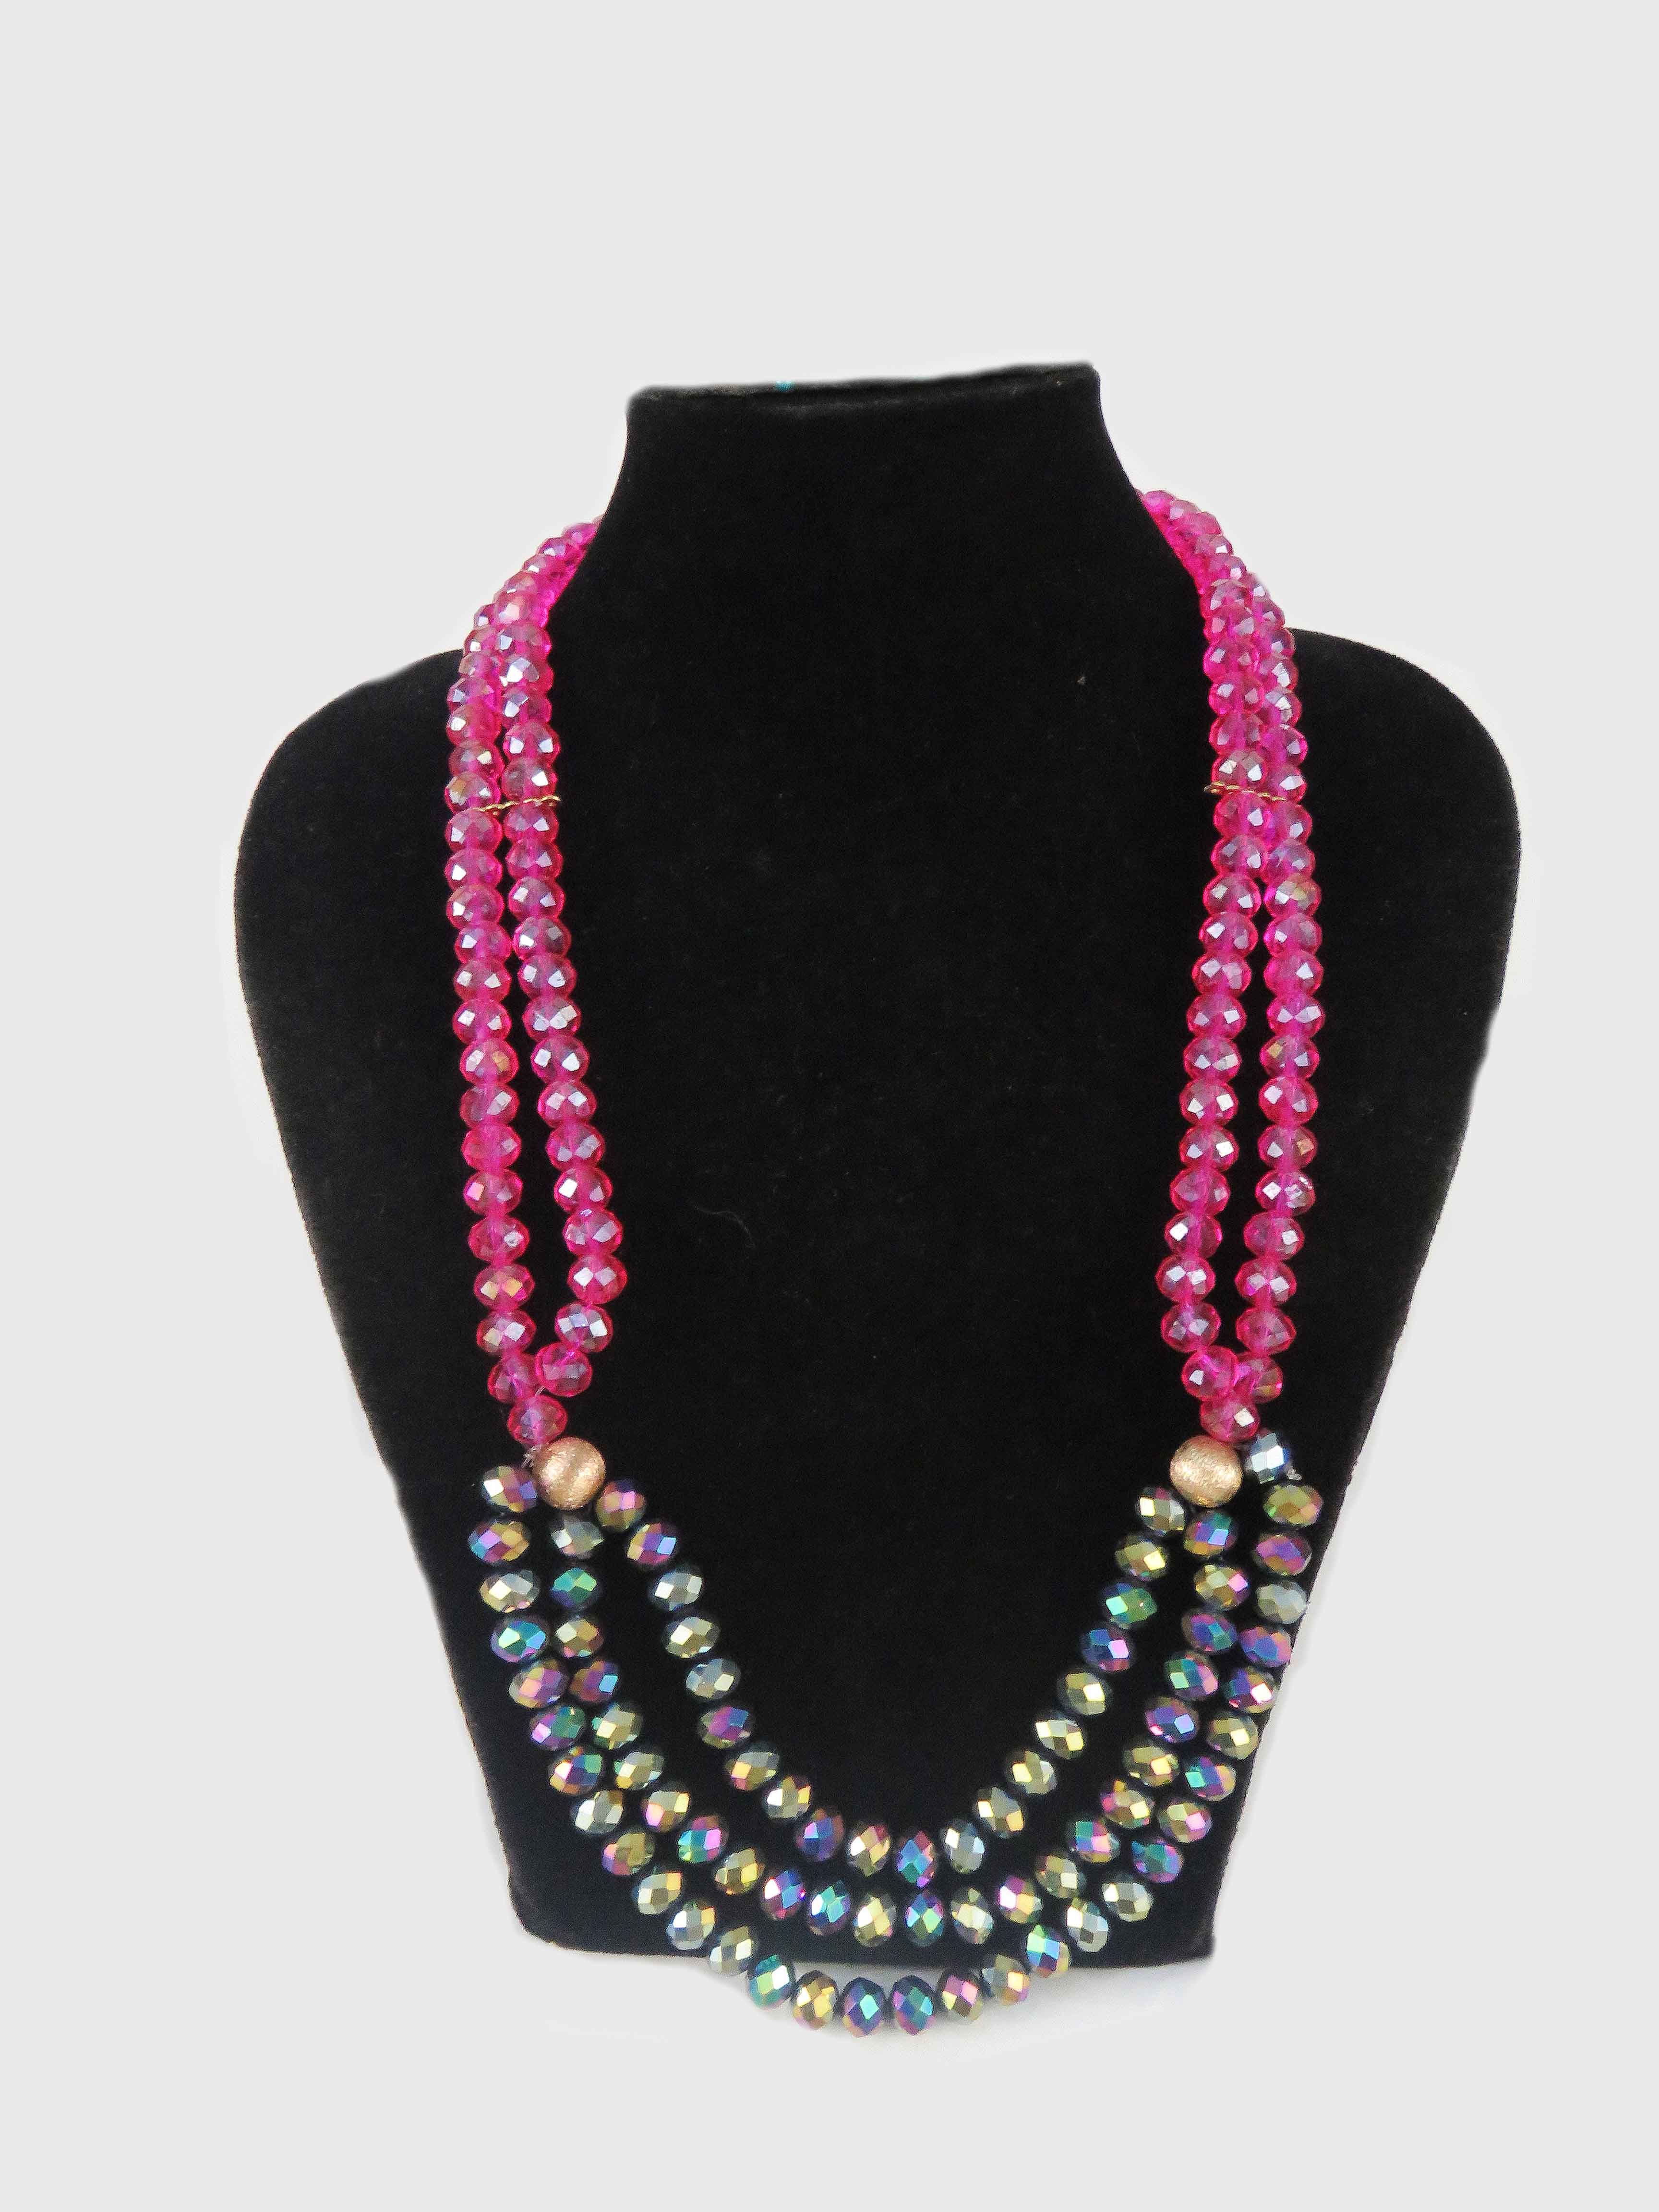 African Layered Necklace Multicolour Bead Set - Bynelo